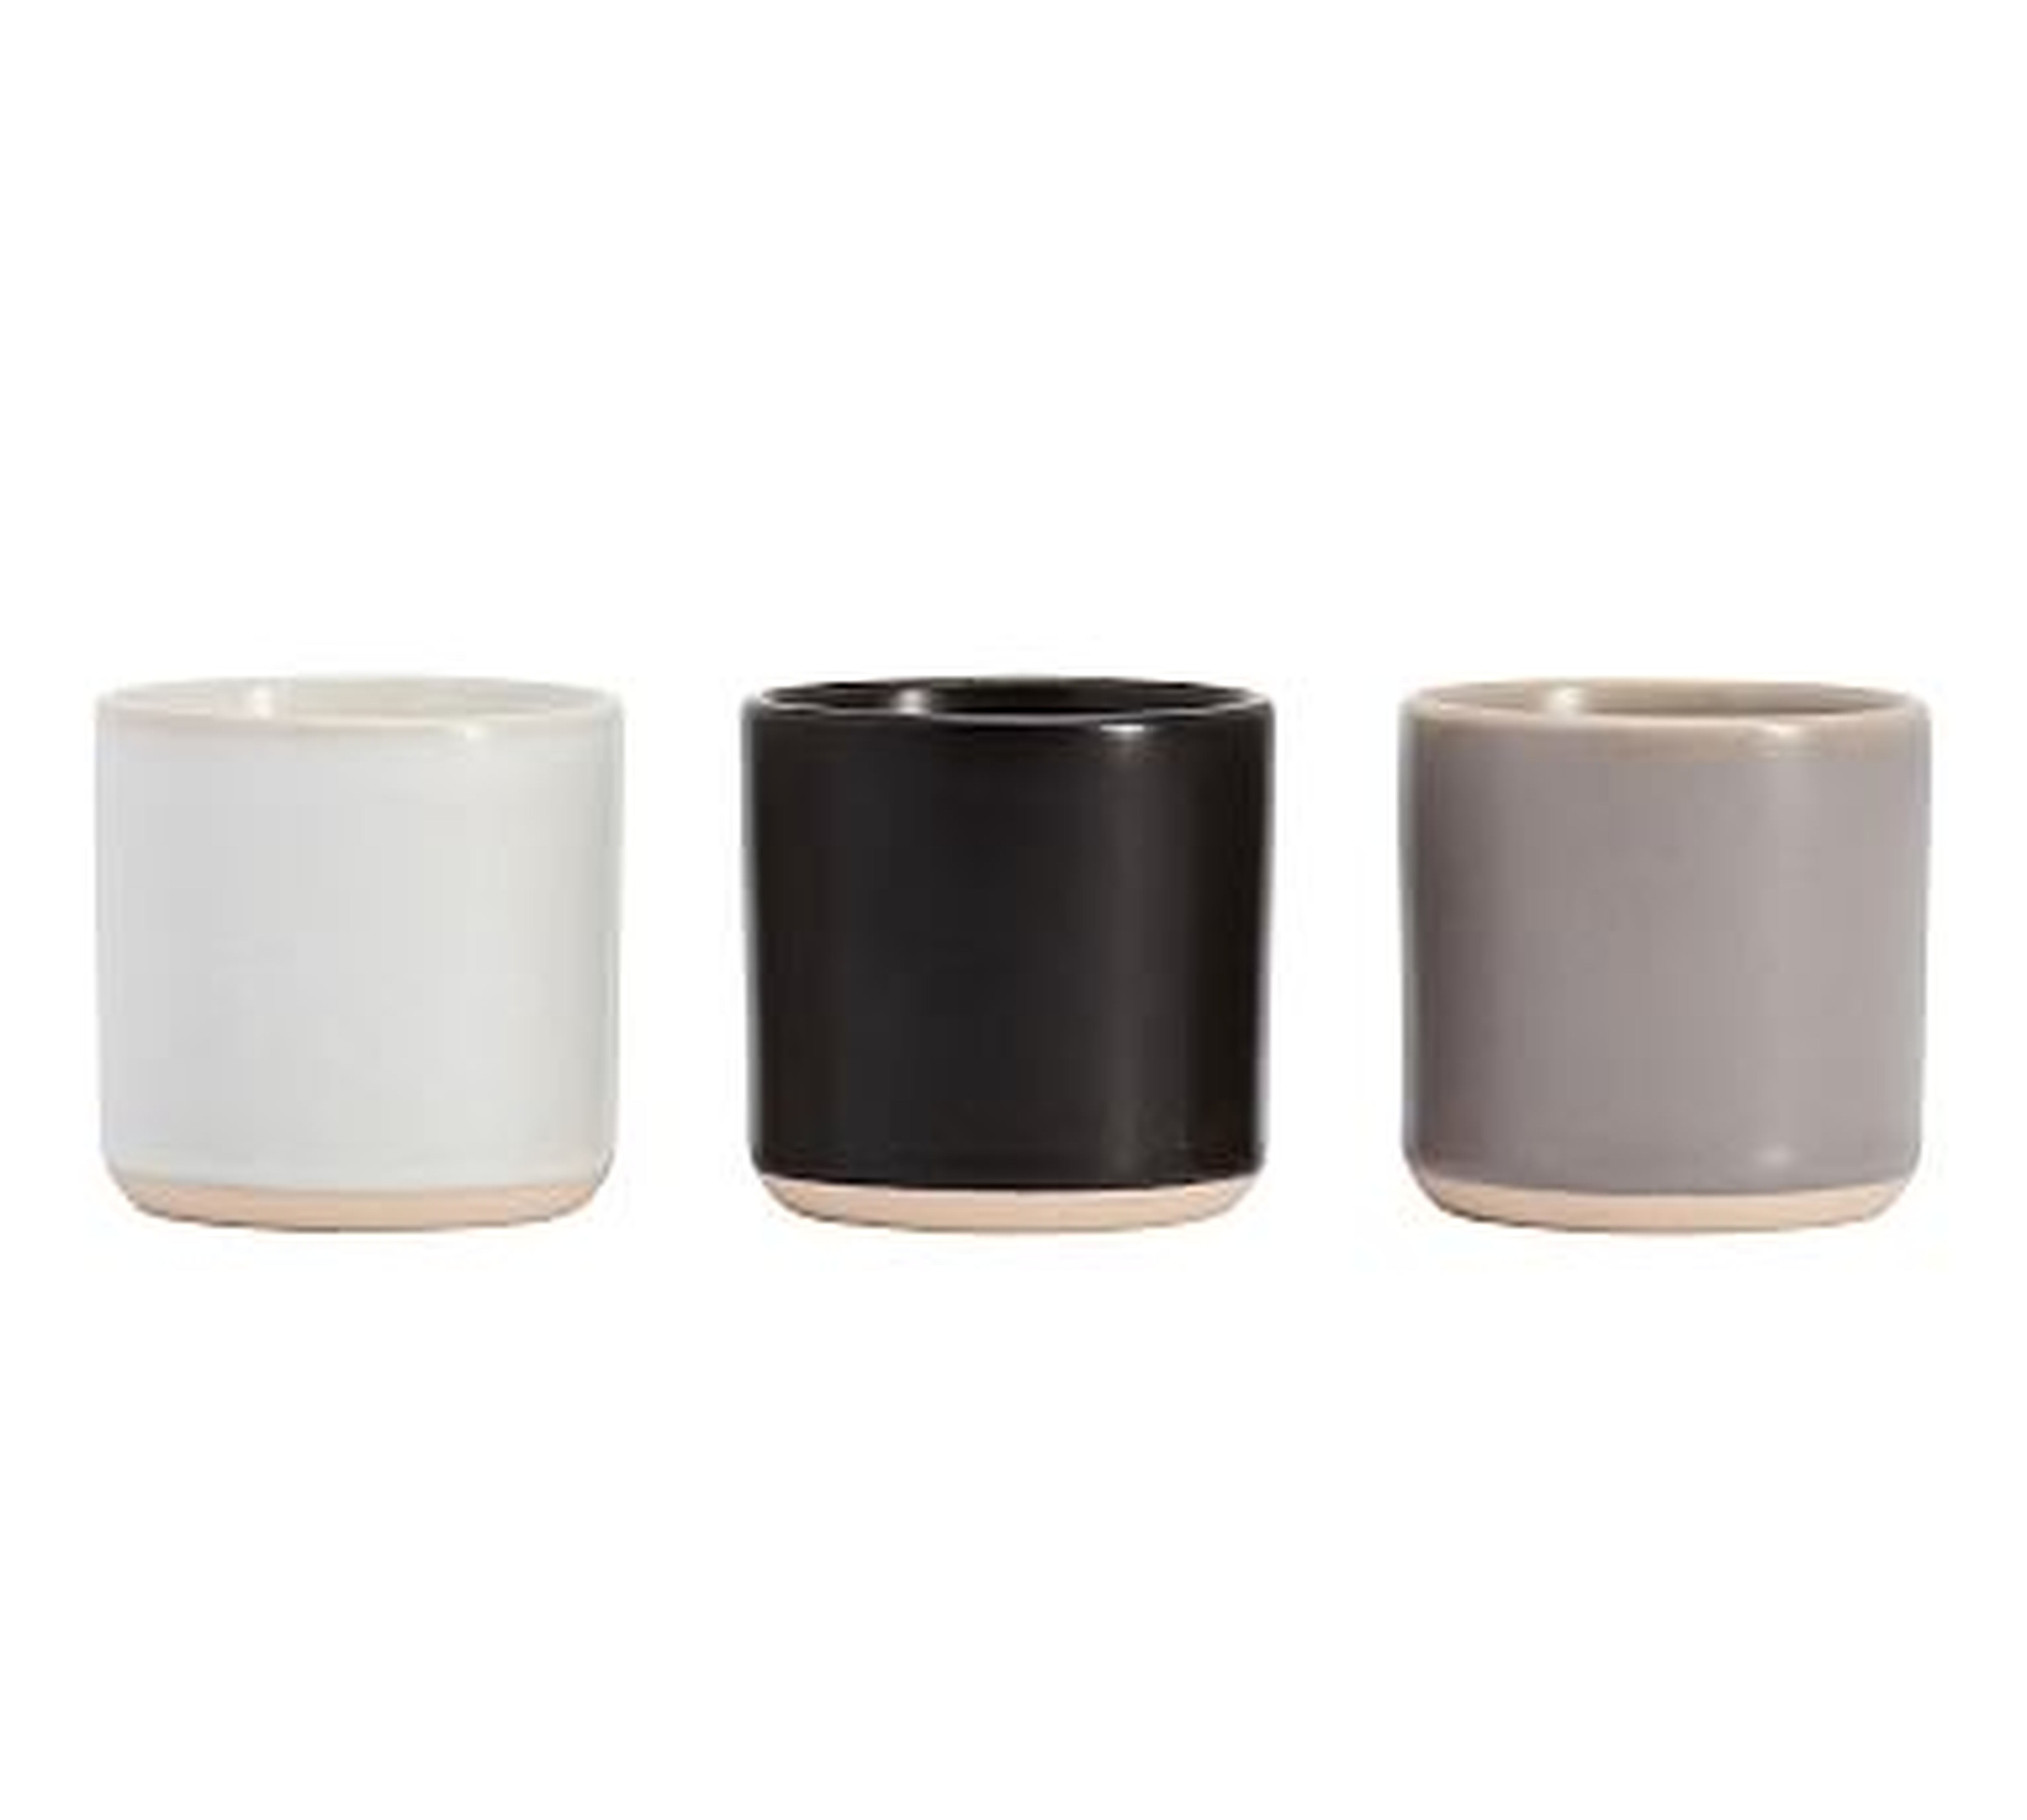 Mason Ceramic Scented Candles, Ivory/Graphite Gray/Charcoal, Mini, Set of 3 - Pottery Barn